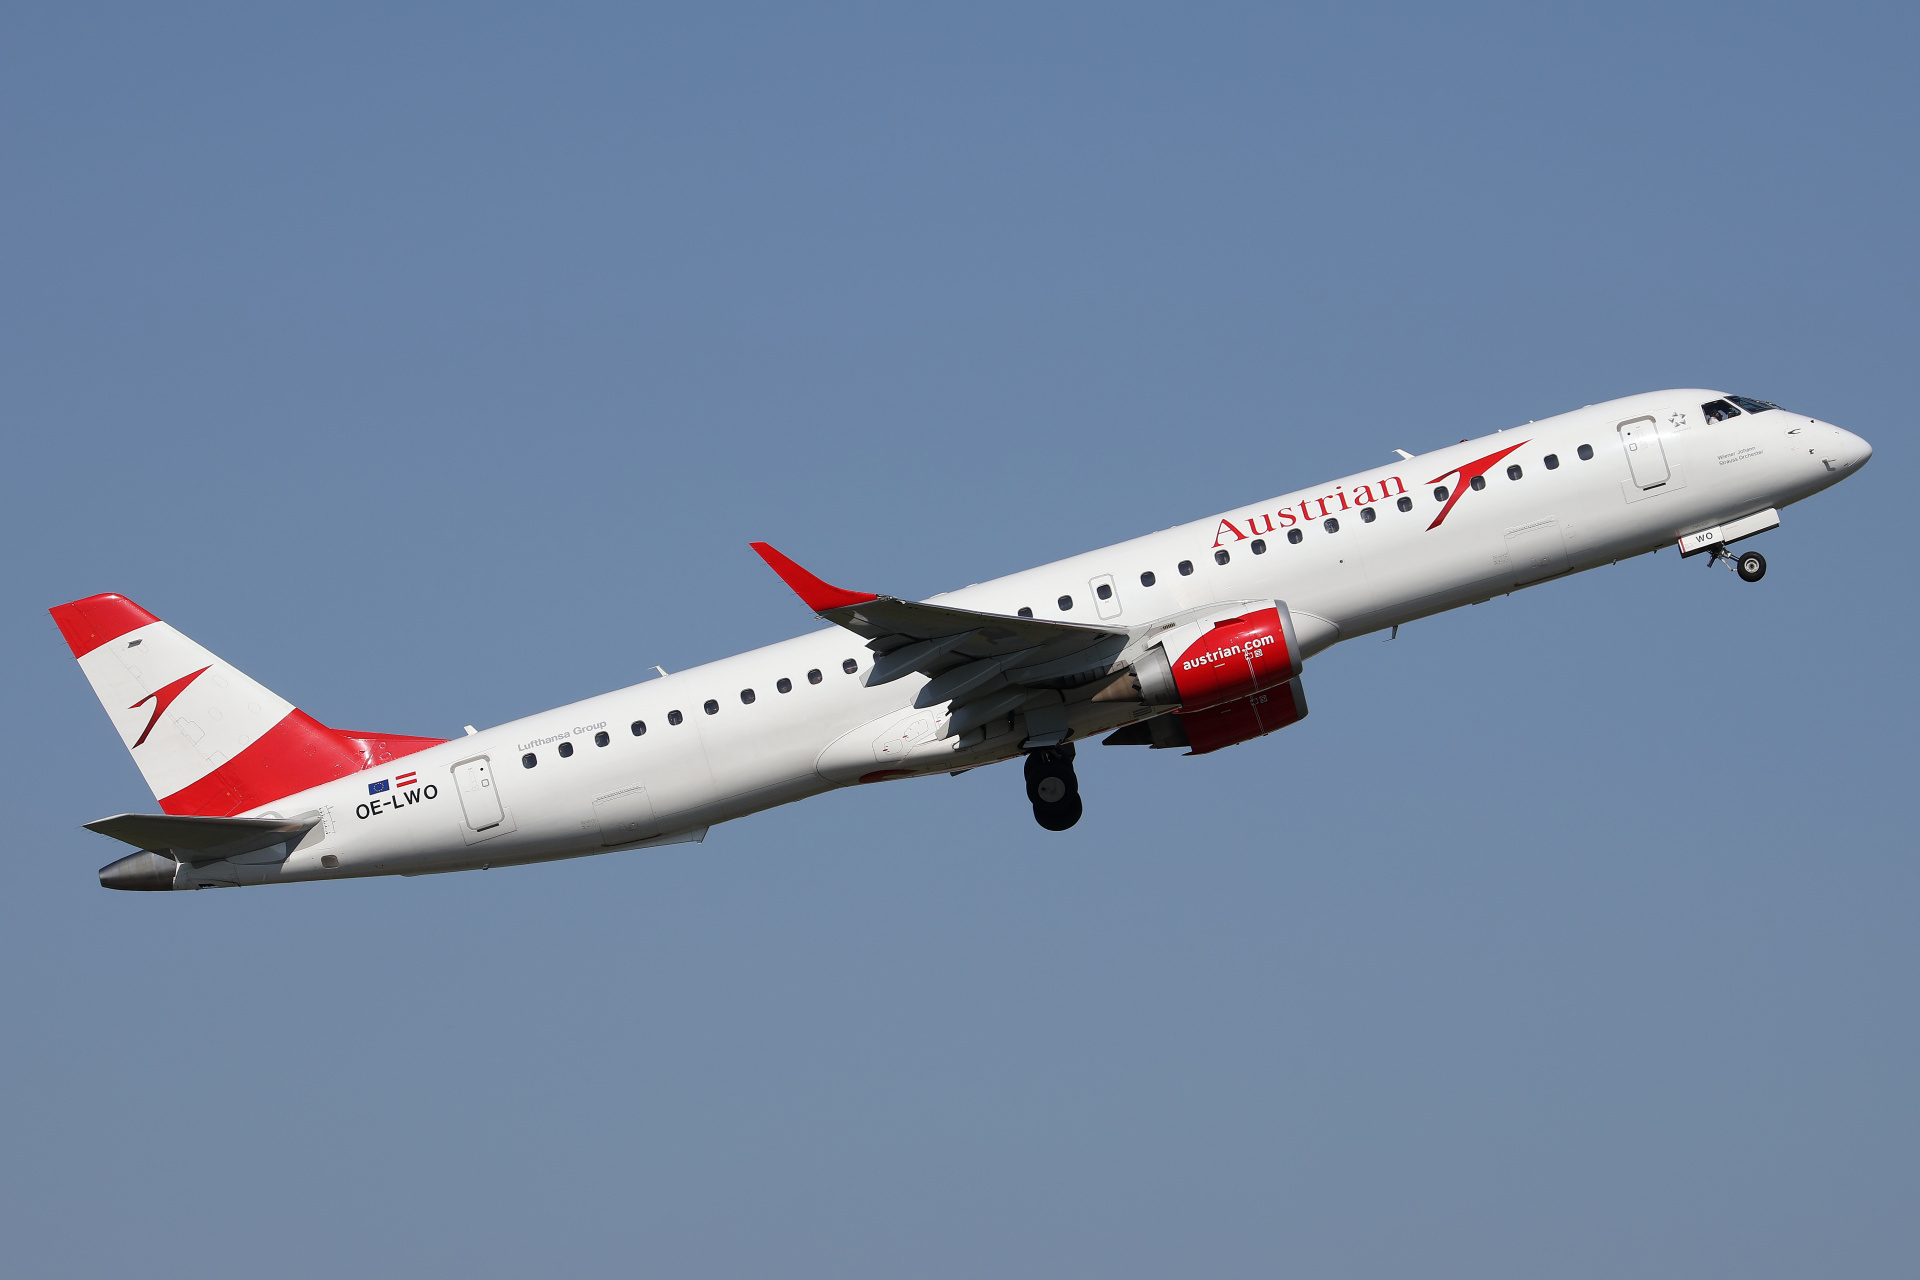 OE-LWO (Aircraft » EPWA Spotting » Embraer E195 » Austrian Airlines)